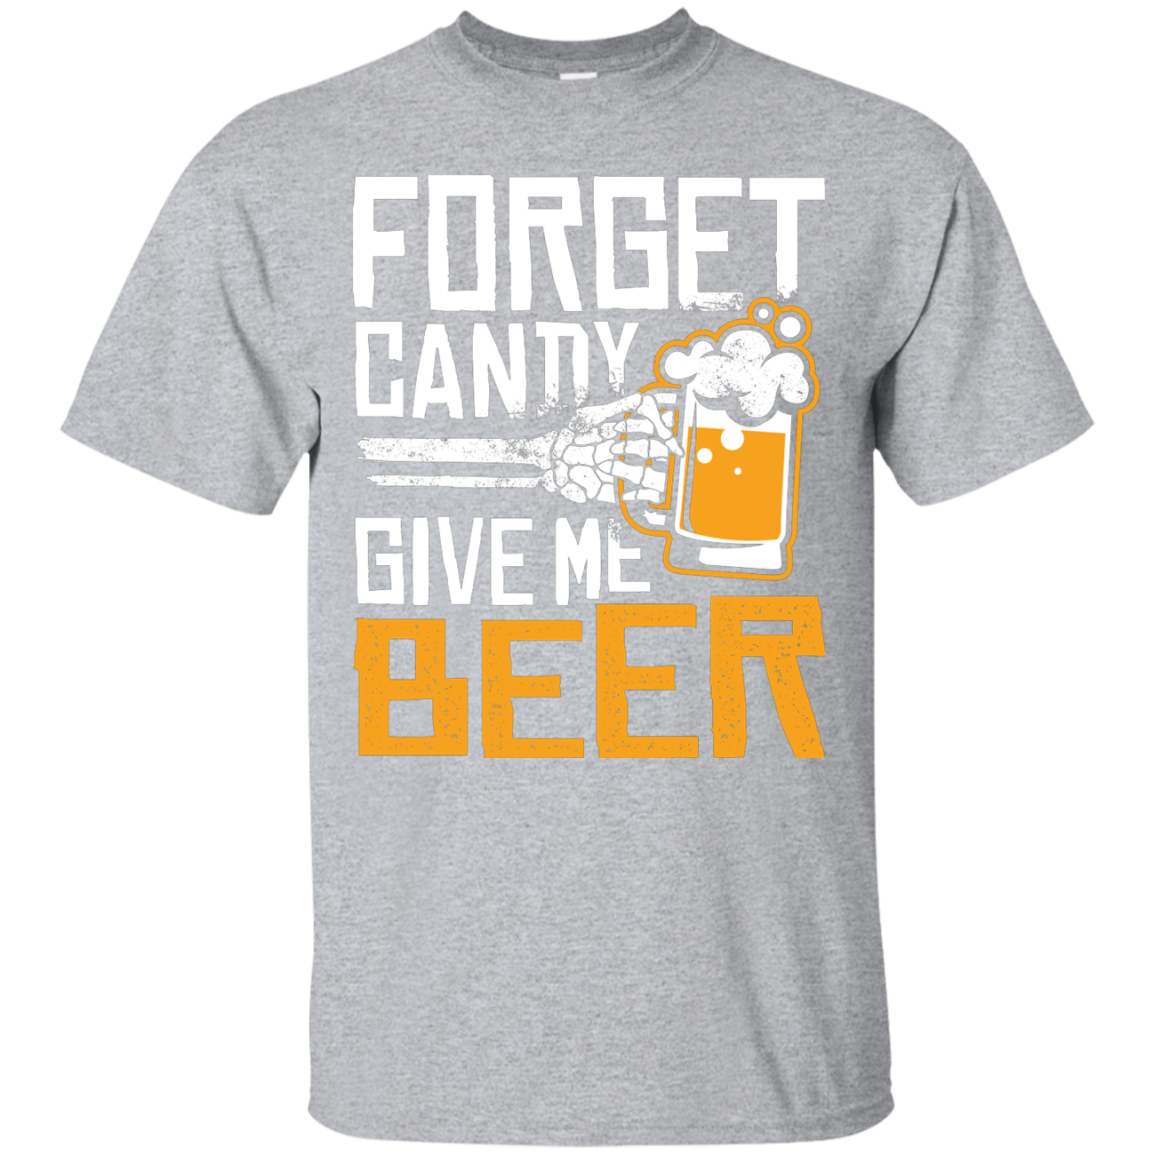 Forget Candy Give Me Beer Halloween T-Shirt Apparel - The Beer Lodge